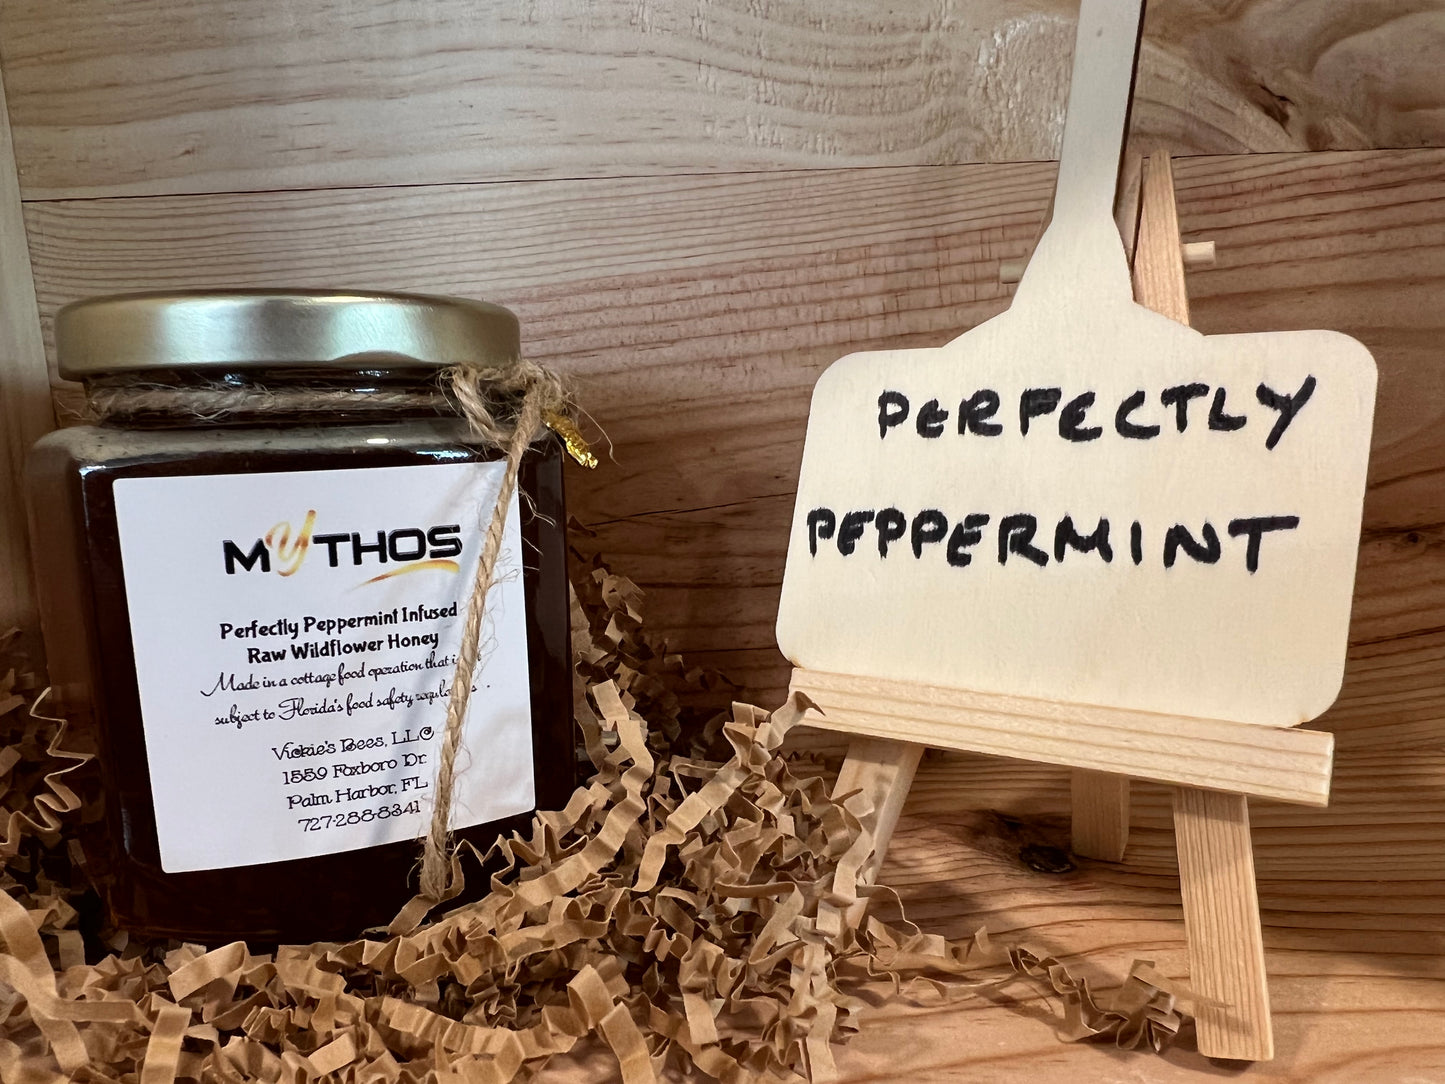 Perfectly Peppermint naturally infused honey